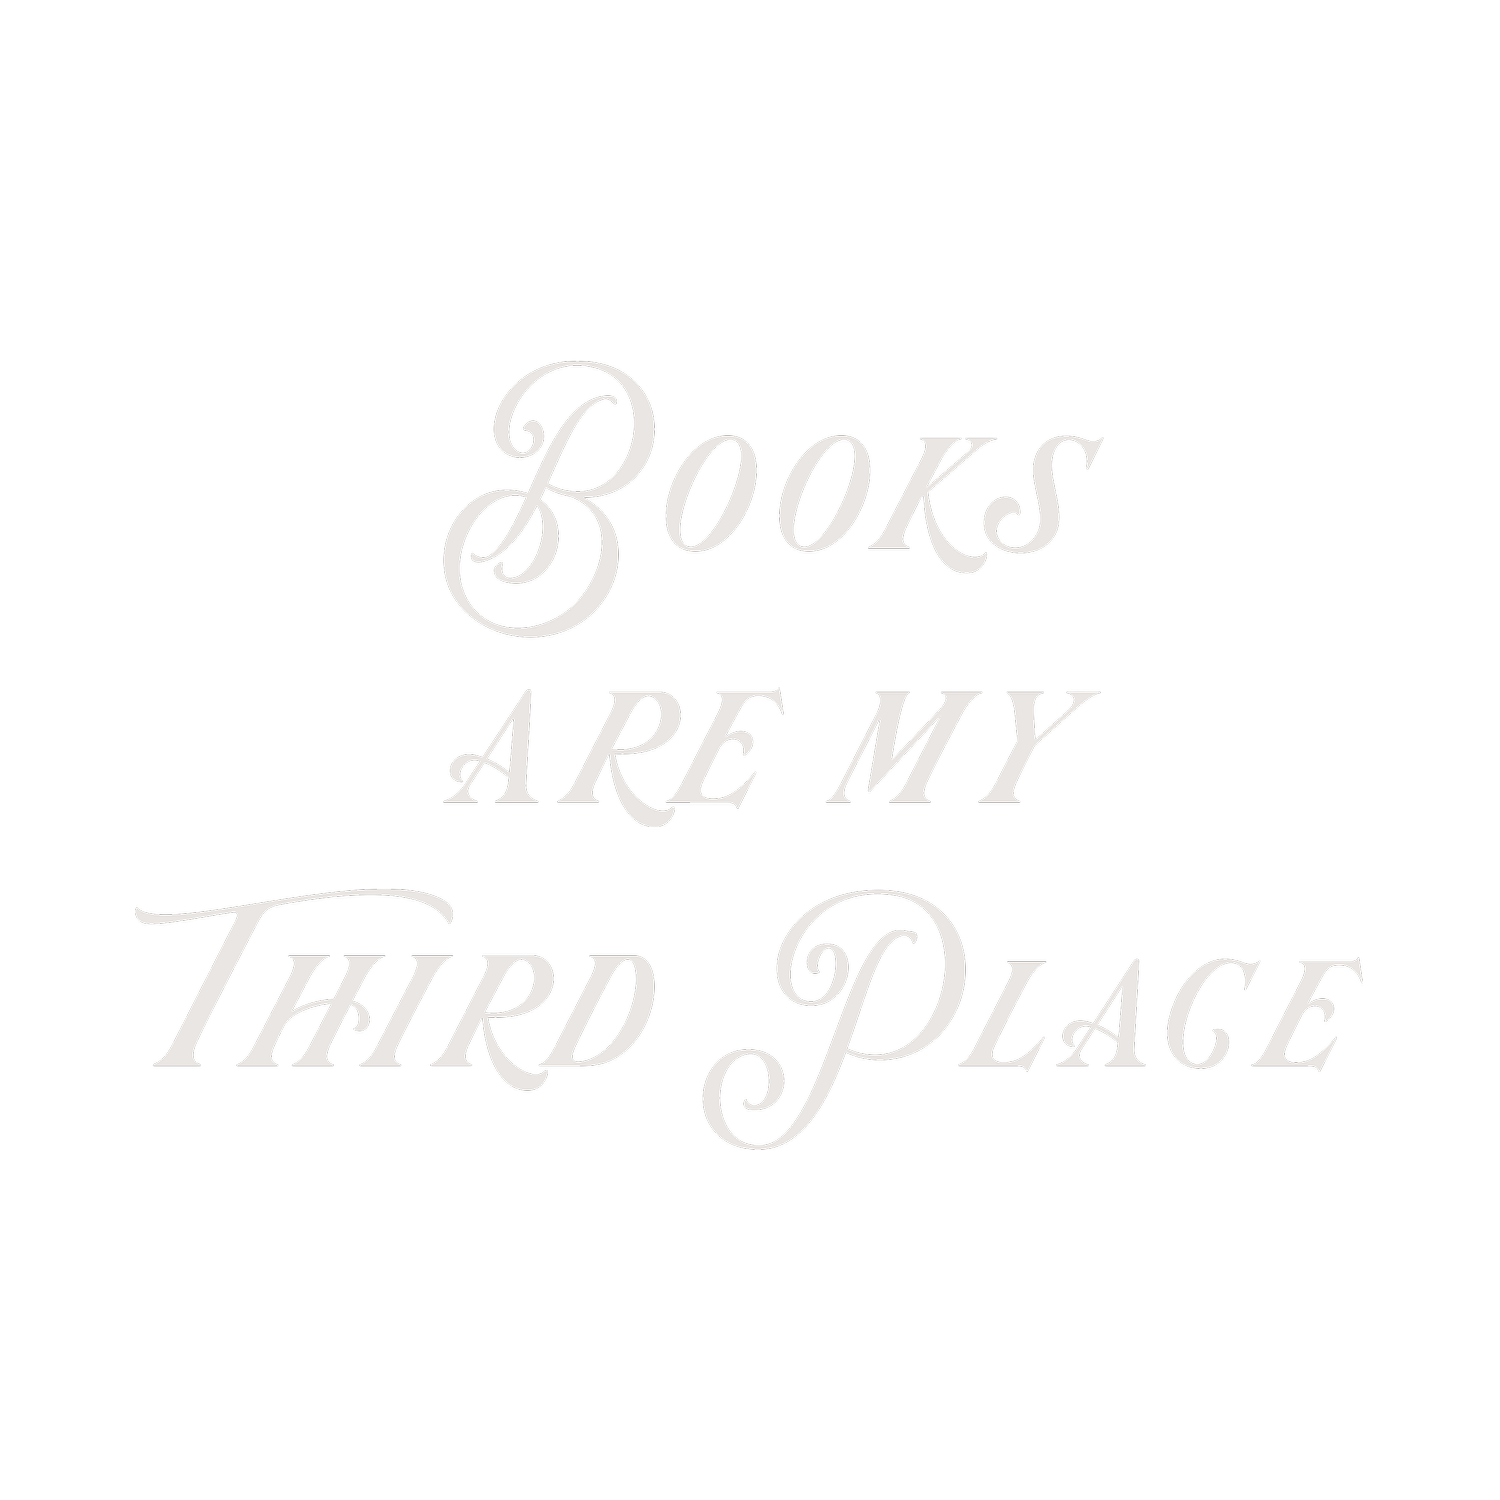 Books Are My Third Place